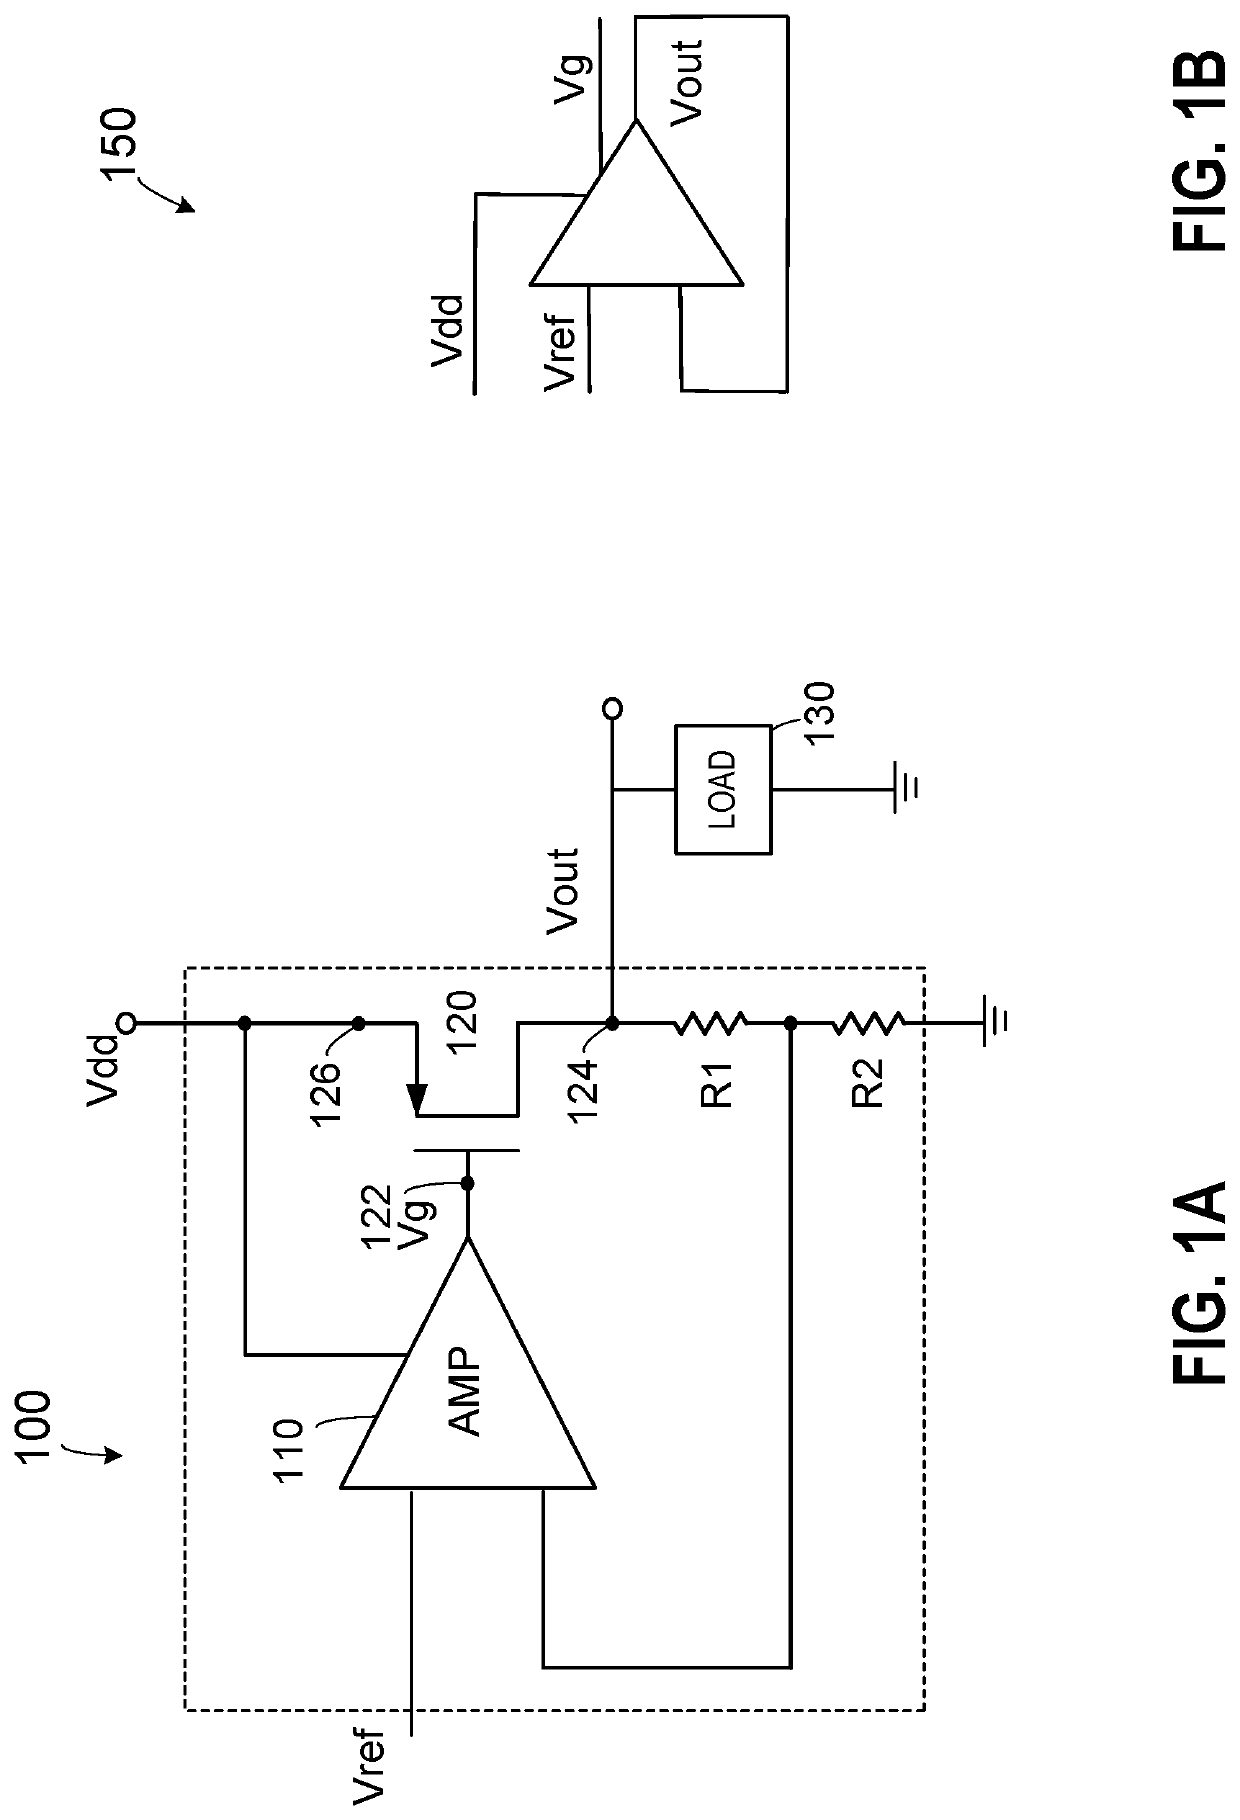 Distributed low-dropout voltage regulator (LDO) with uniform power delivery